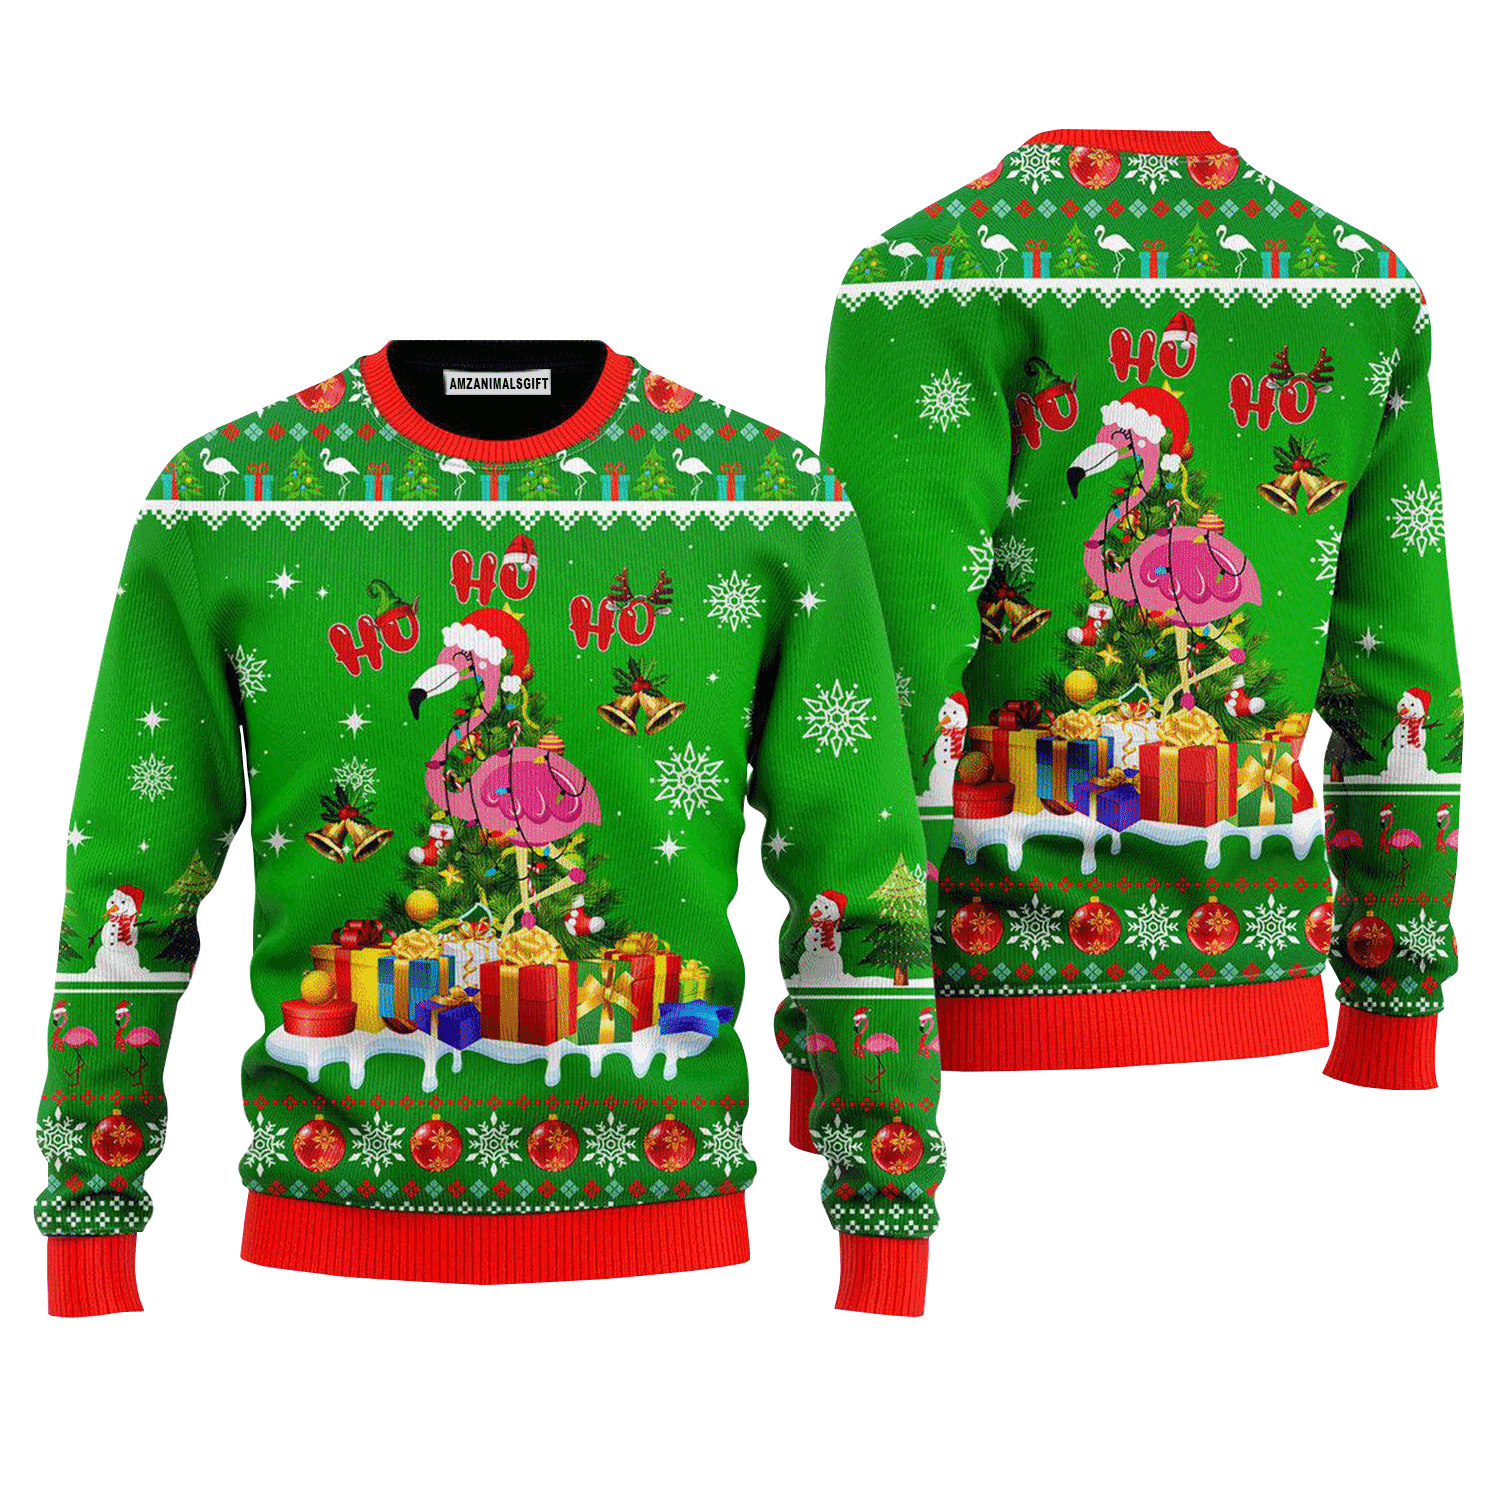 Funny Flamingo Christmas Gift Sweater Hohoho, Ugly Sweater For Men & Women, Perfect Outfit For Christmas New Year Autumn Winter